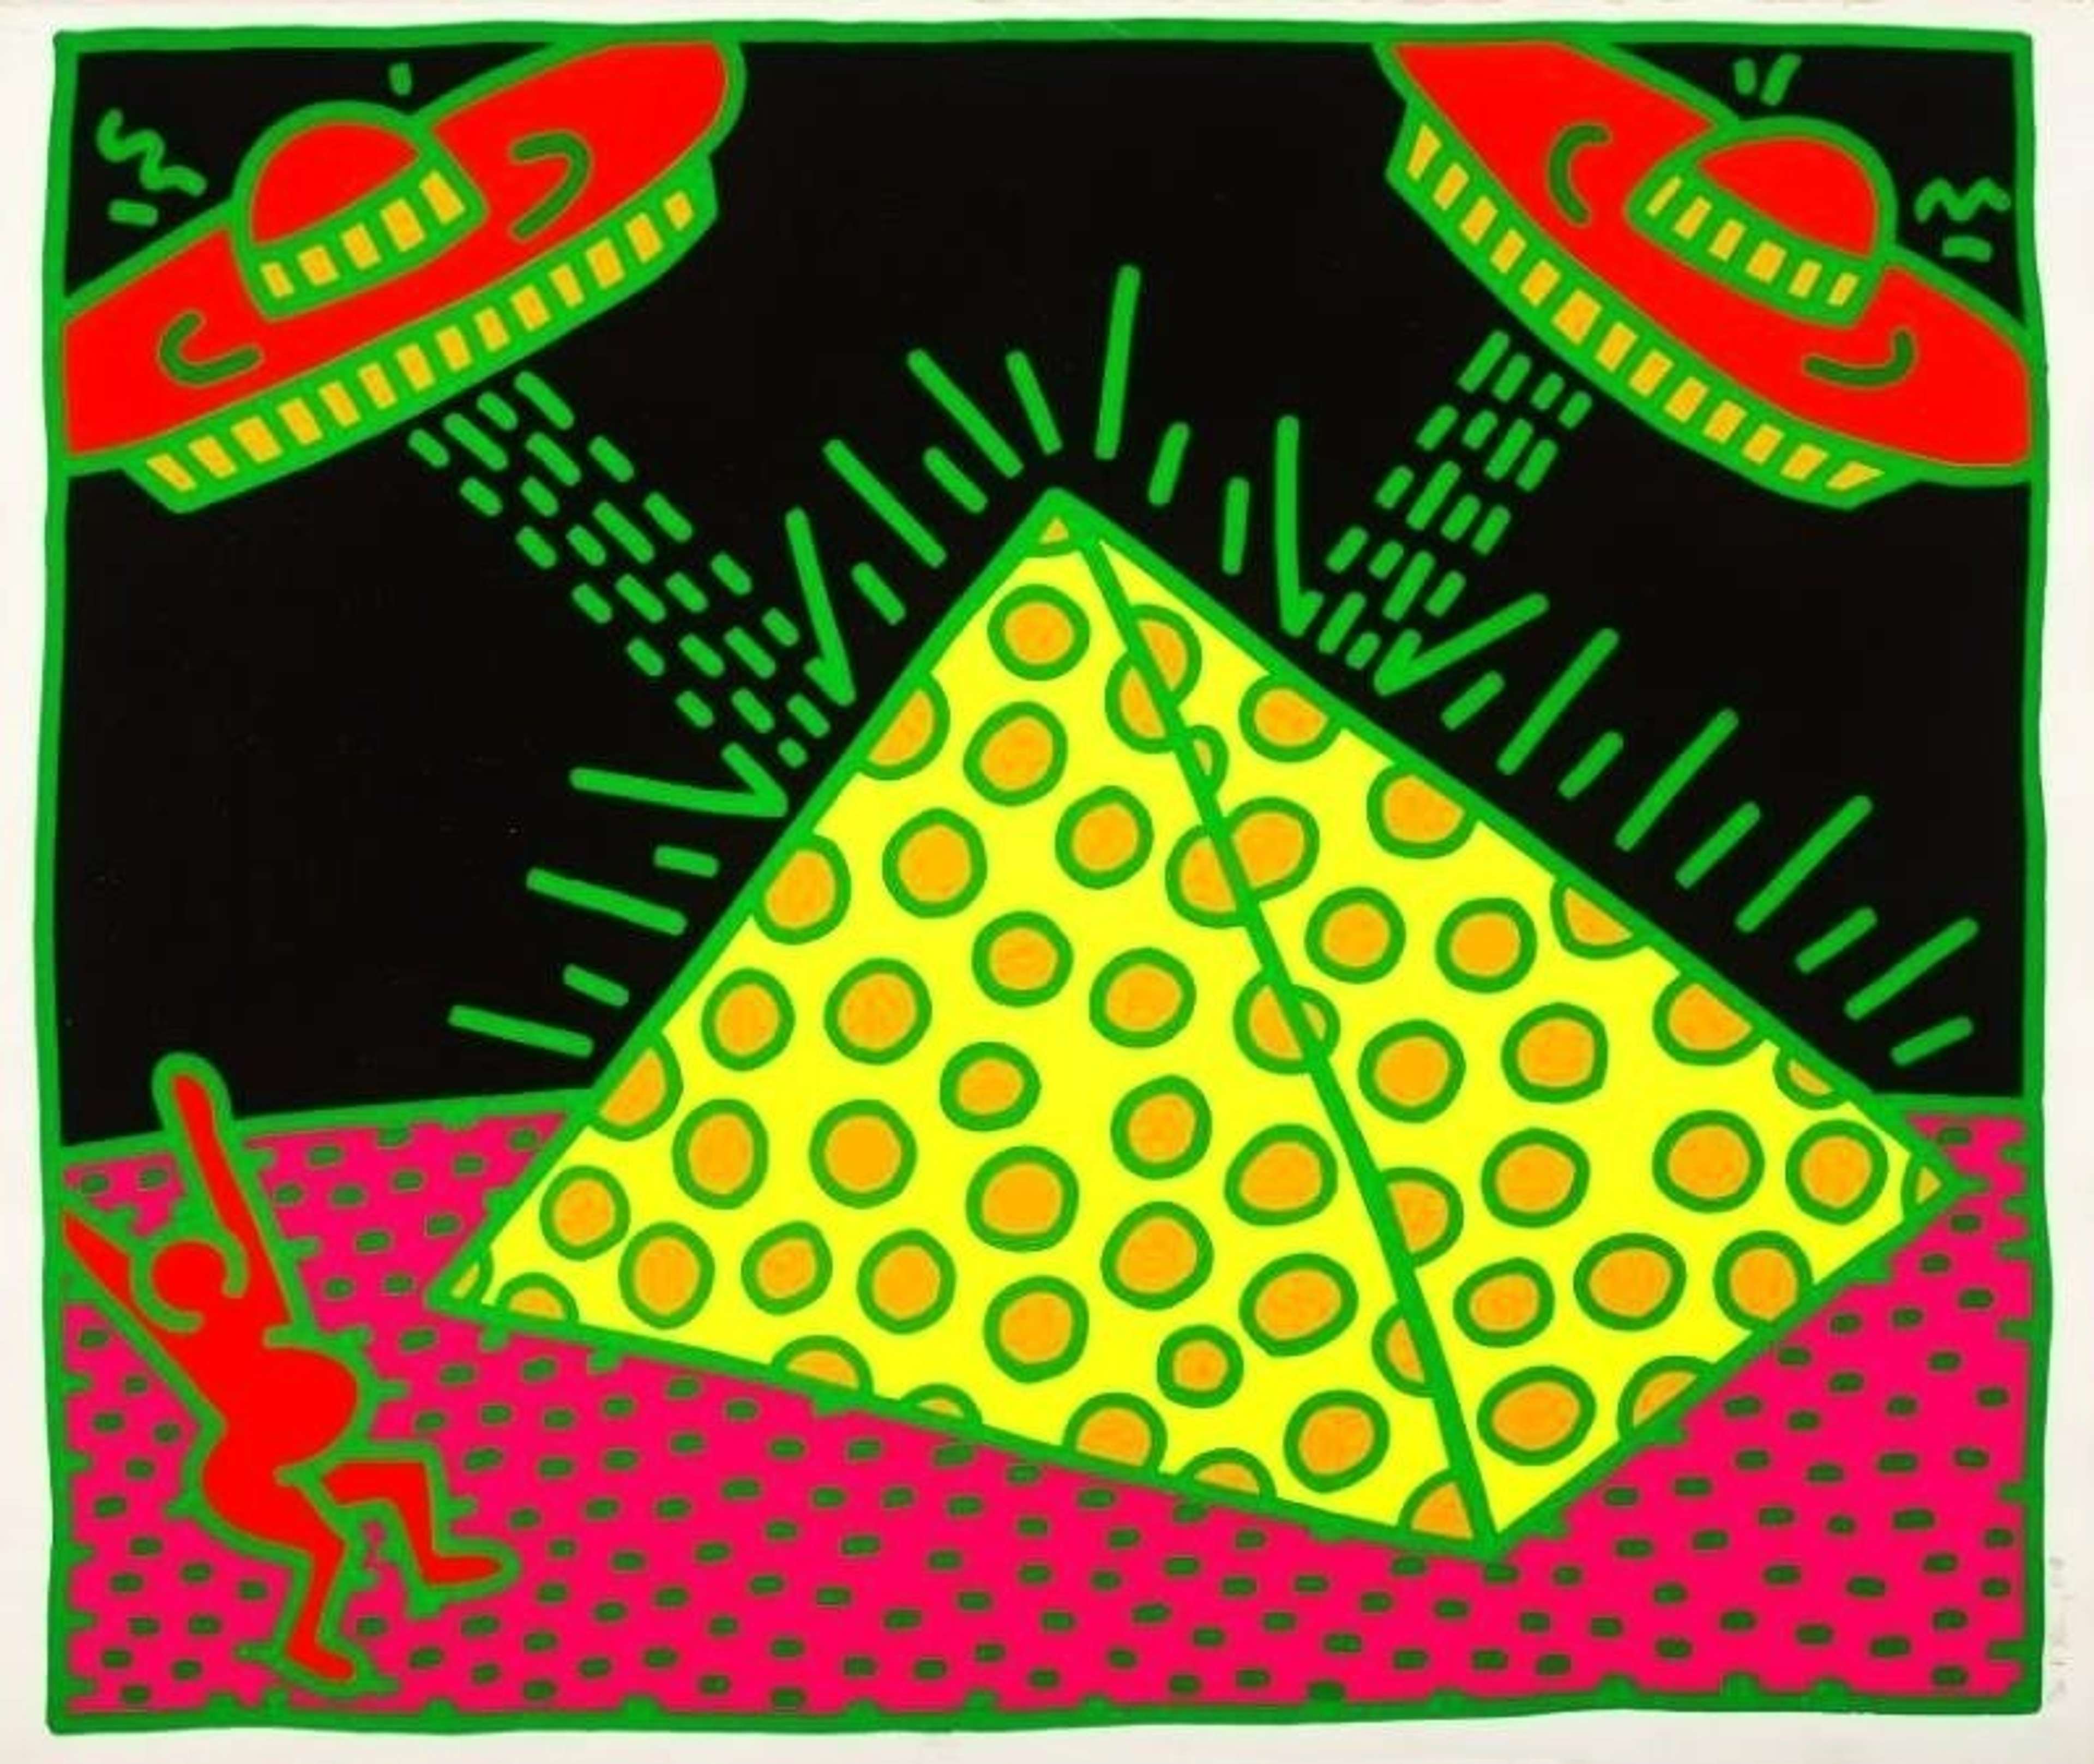 Fertility 2 by Keith Haring